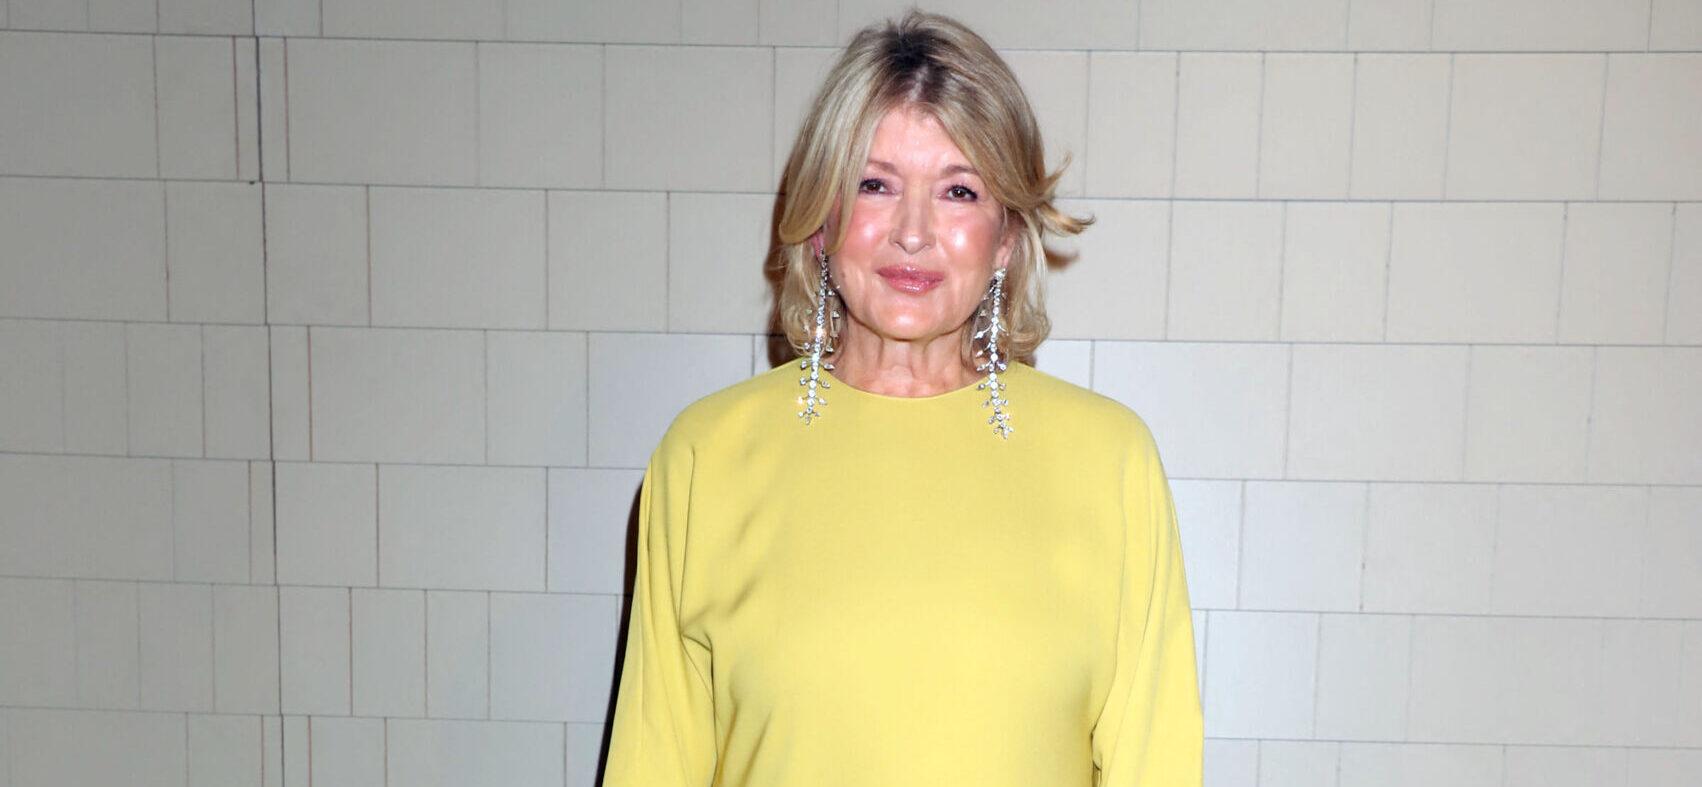 Martha Stewart, 82, Admits She Doesn’t ‘Want To Look Her Age,’ Addresses Her Botox Use